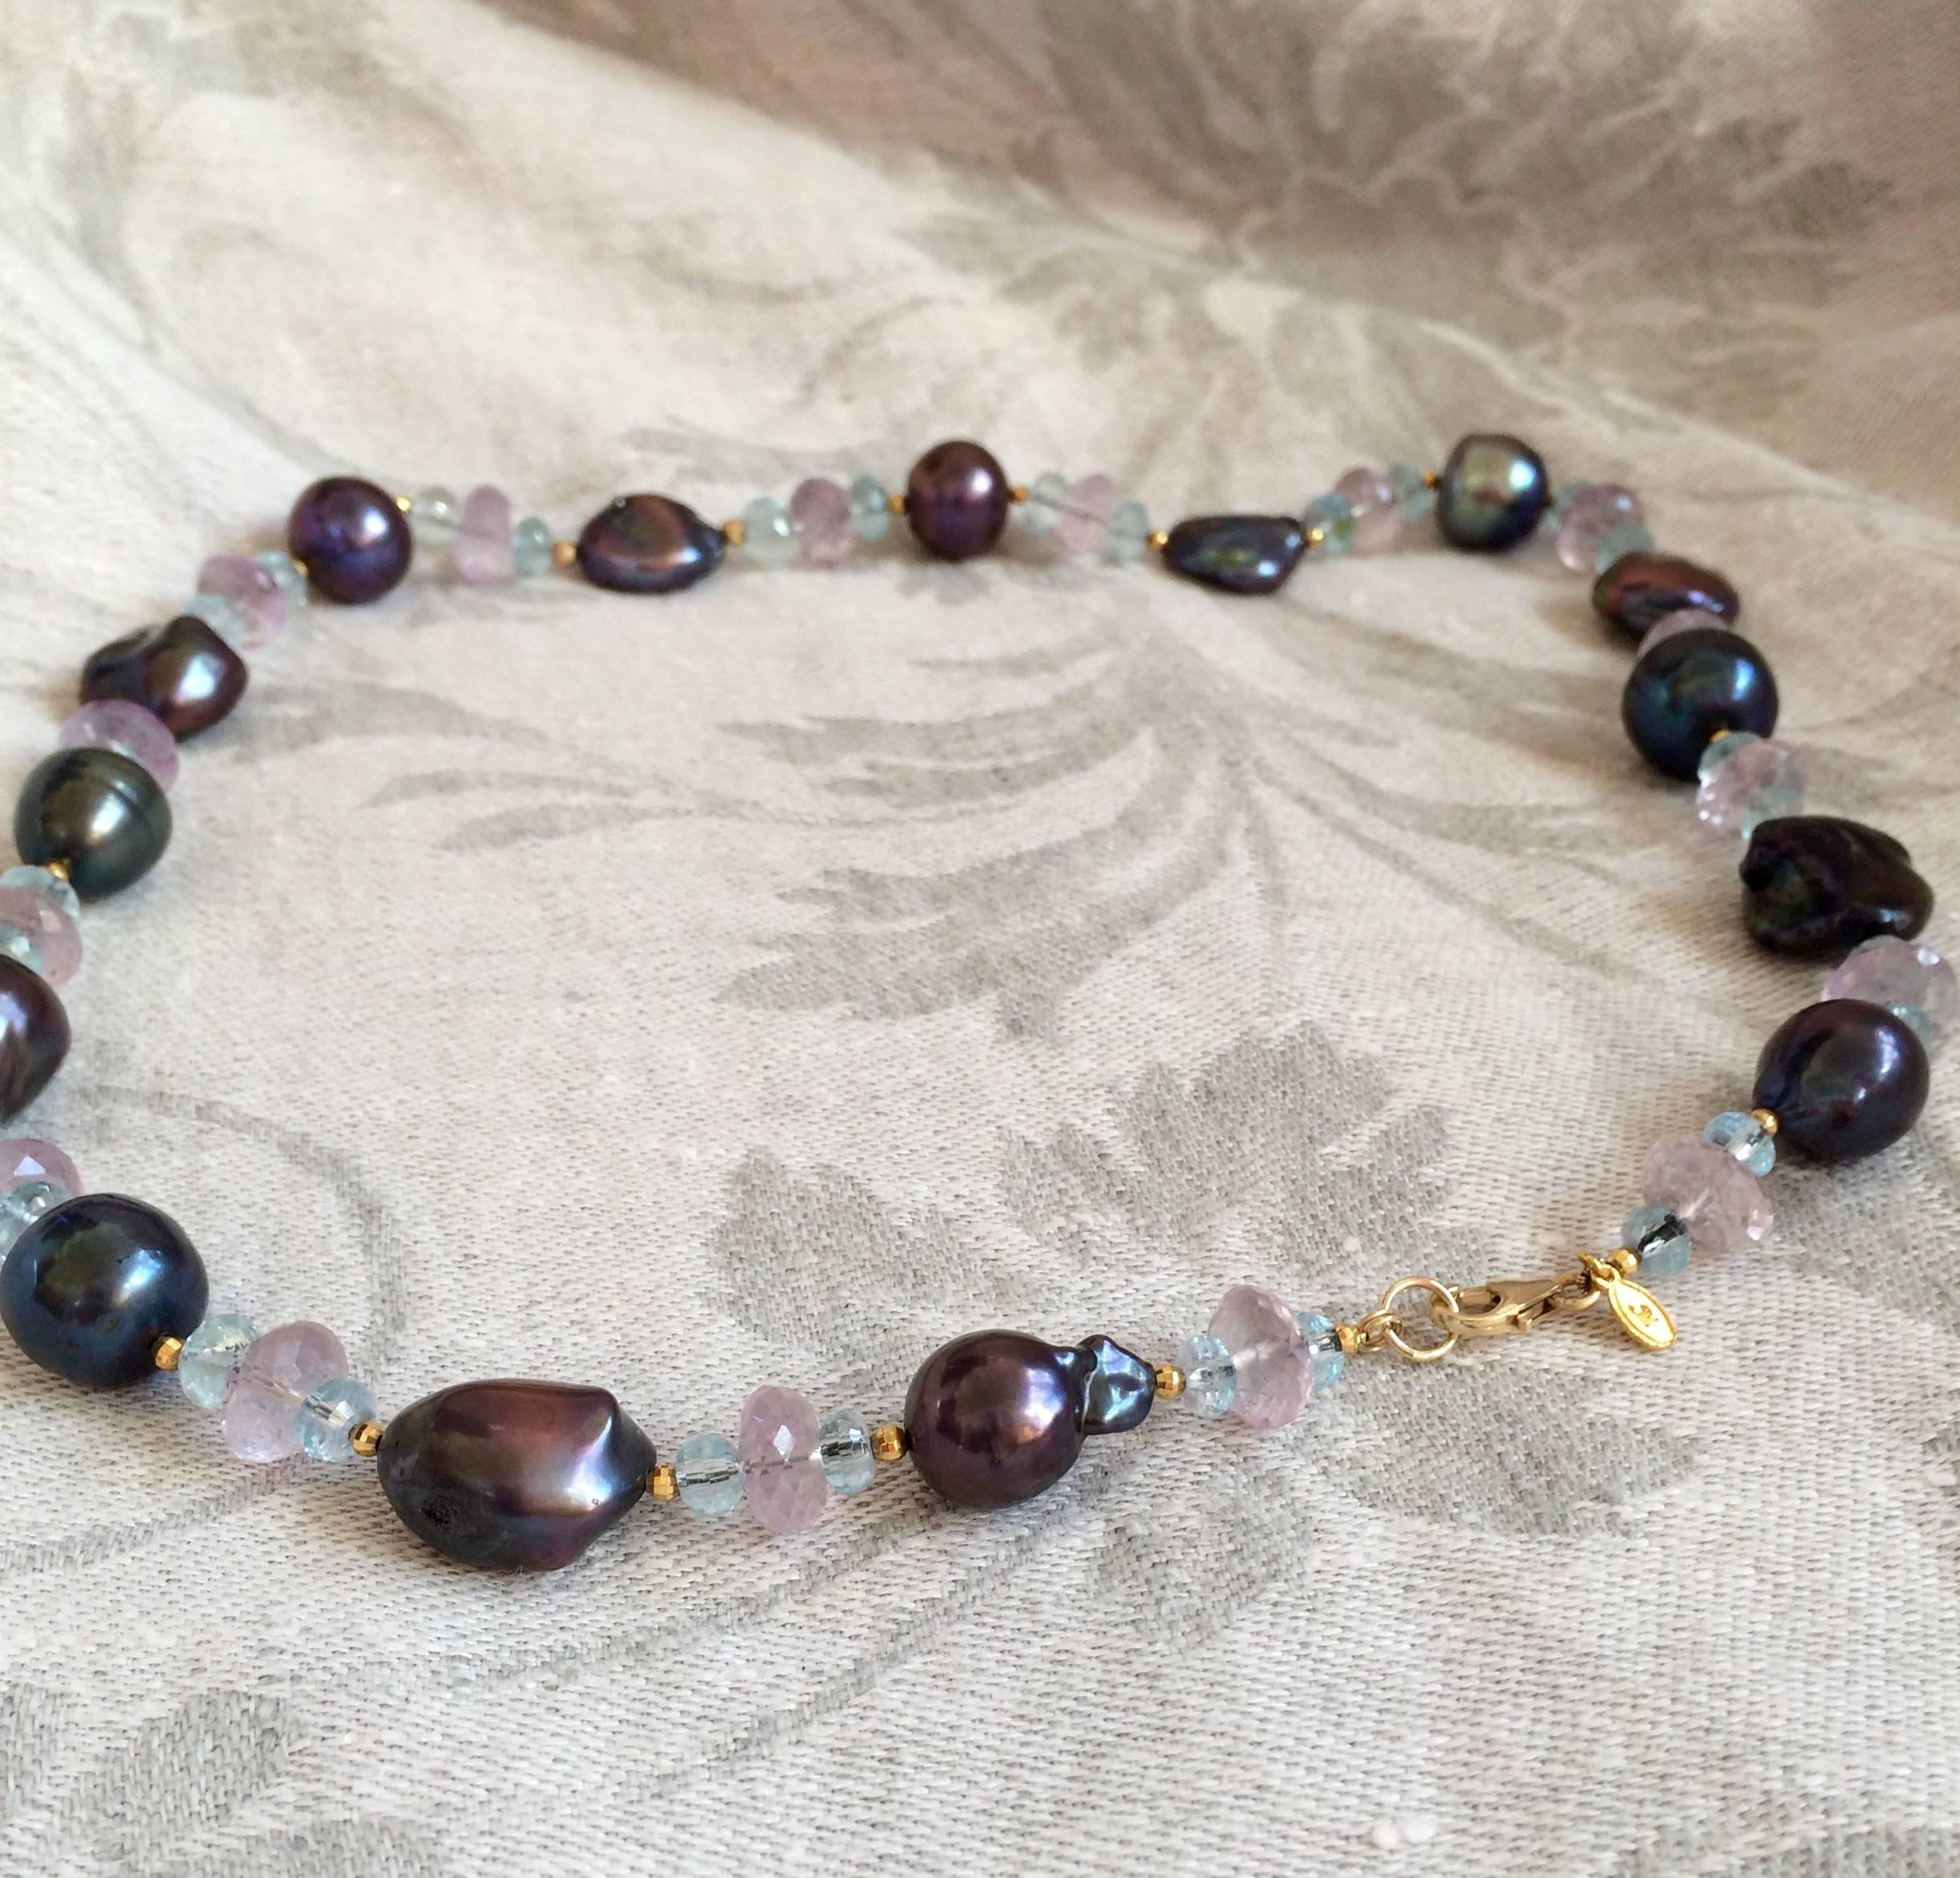 Baroque Revival Black pearl , aquamarine, amethist and gold necklace